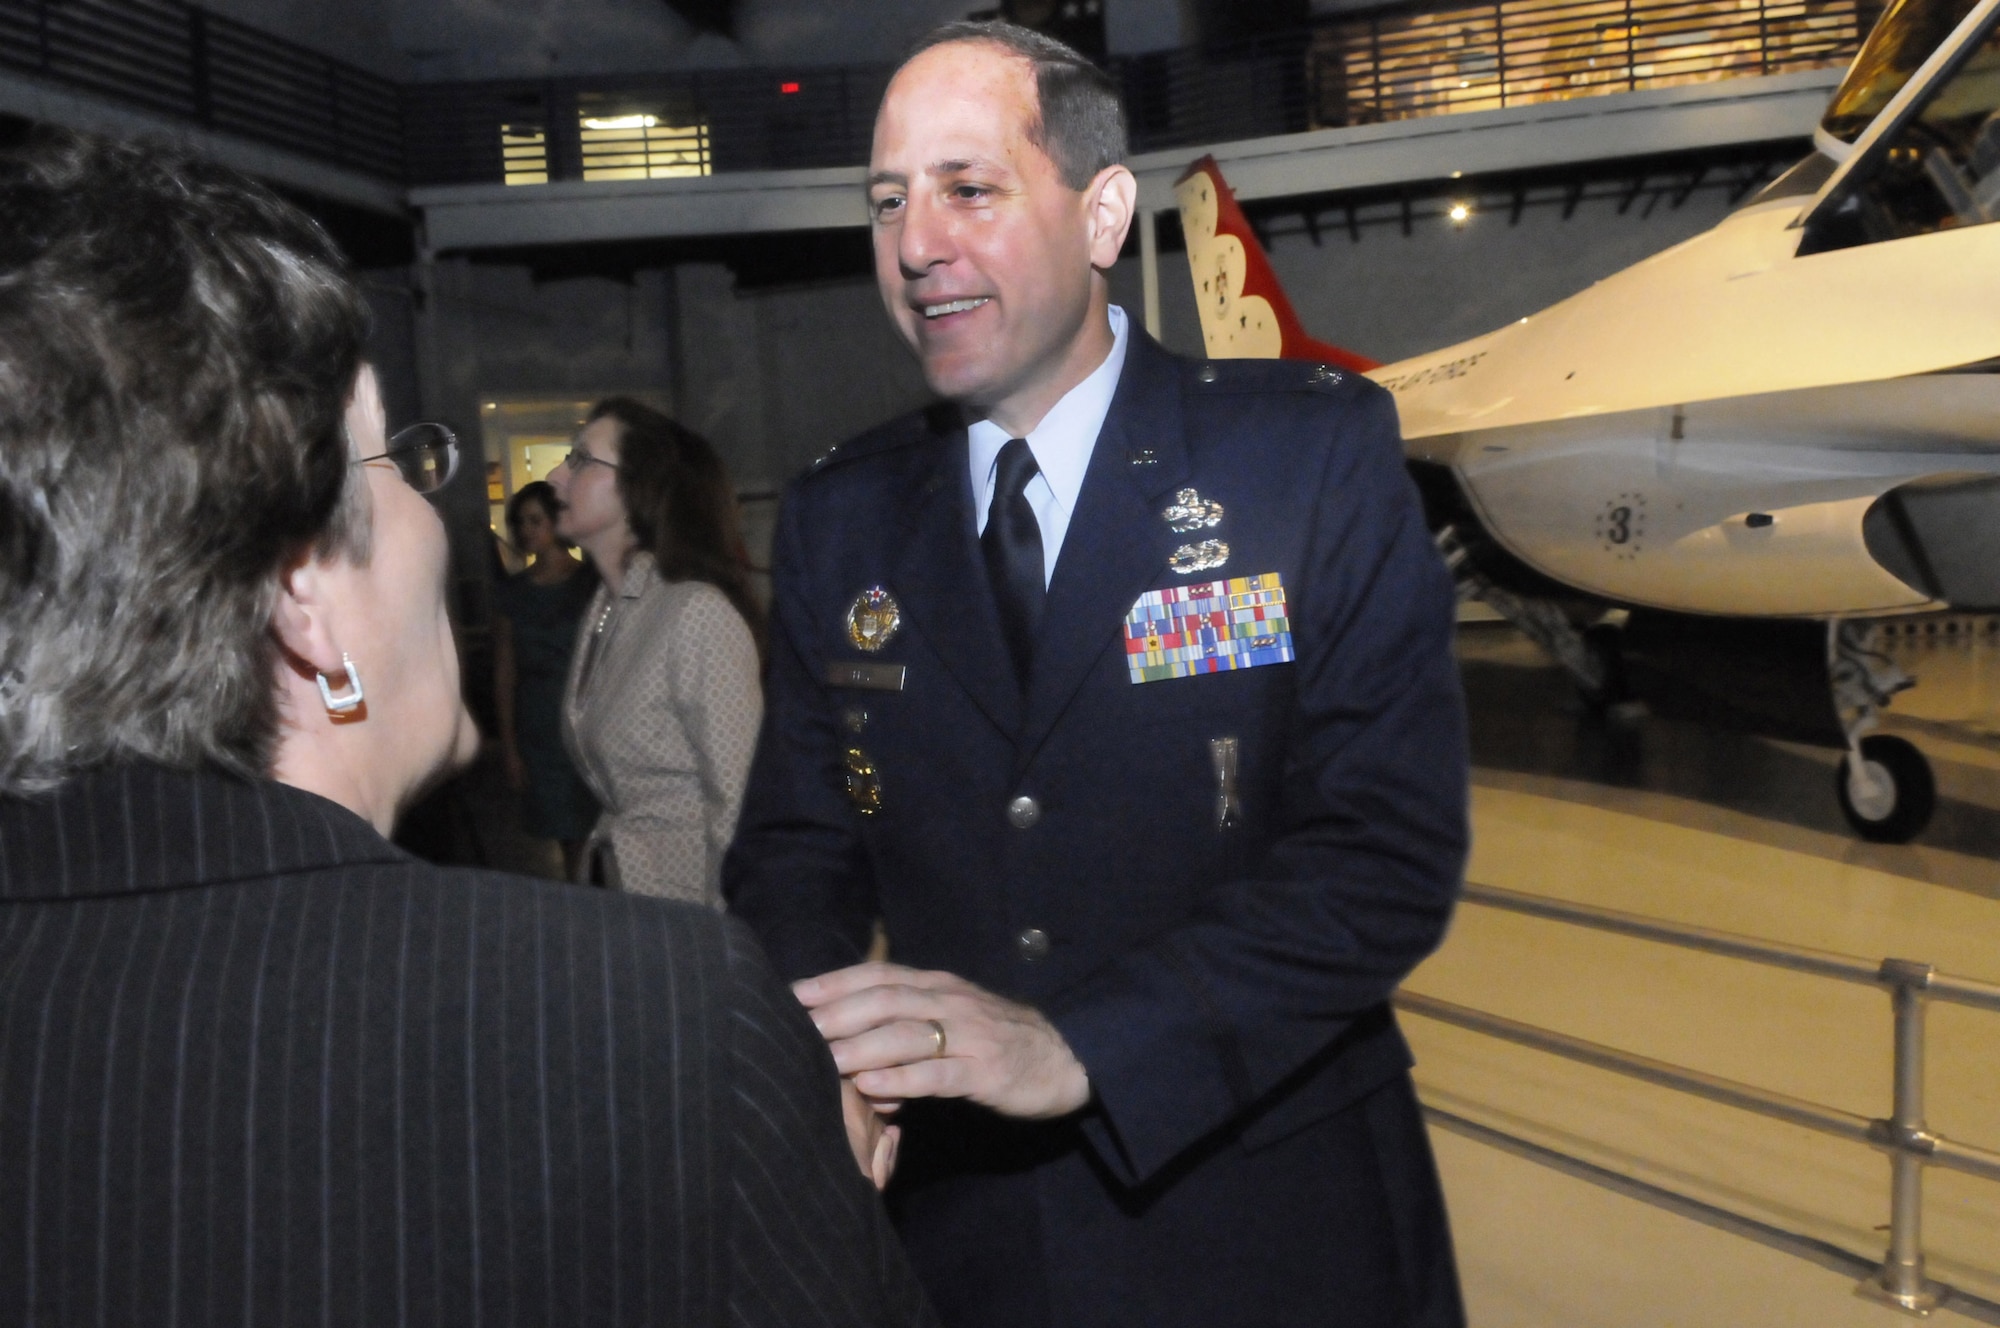 Colonel Lee K. Levy, II, new 402nd Maintenance Wing commander greets people at a reception after the change of command ceremony Tuesday. U. S. Air Force photo by Sue Sapp